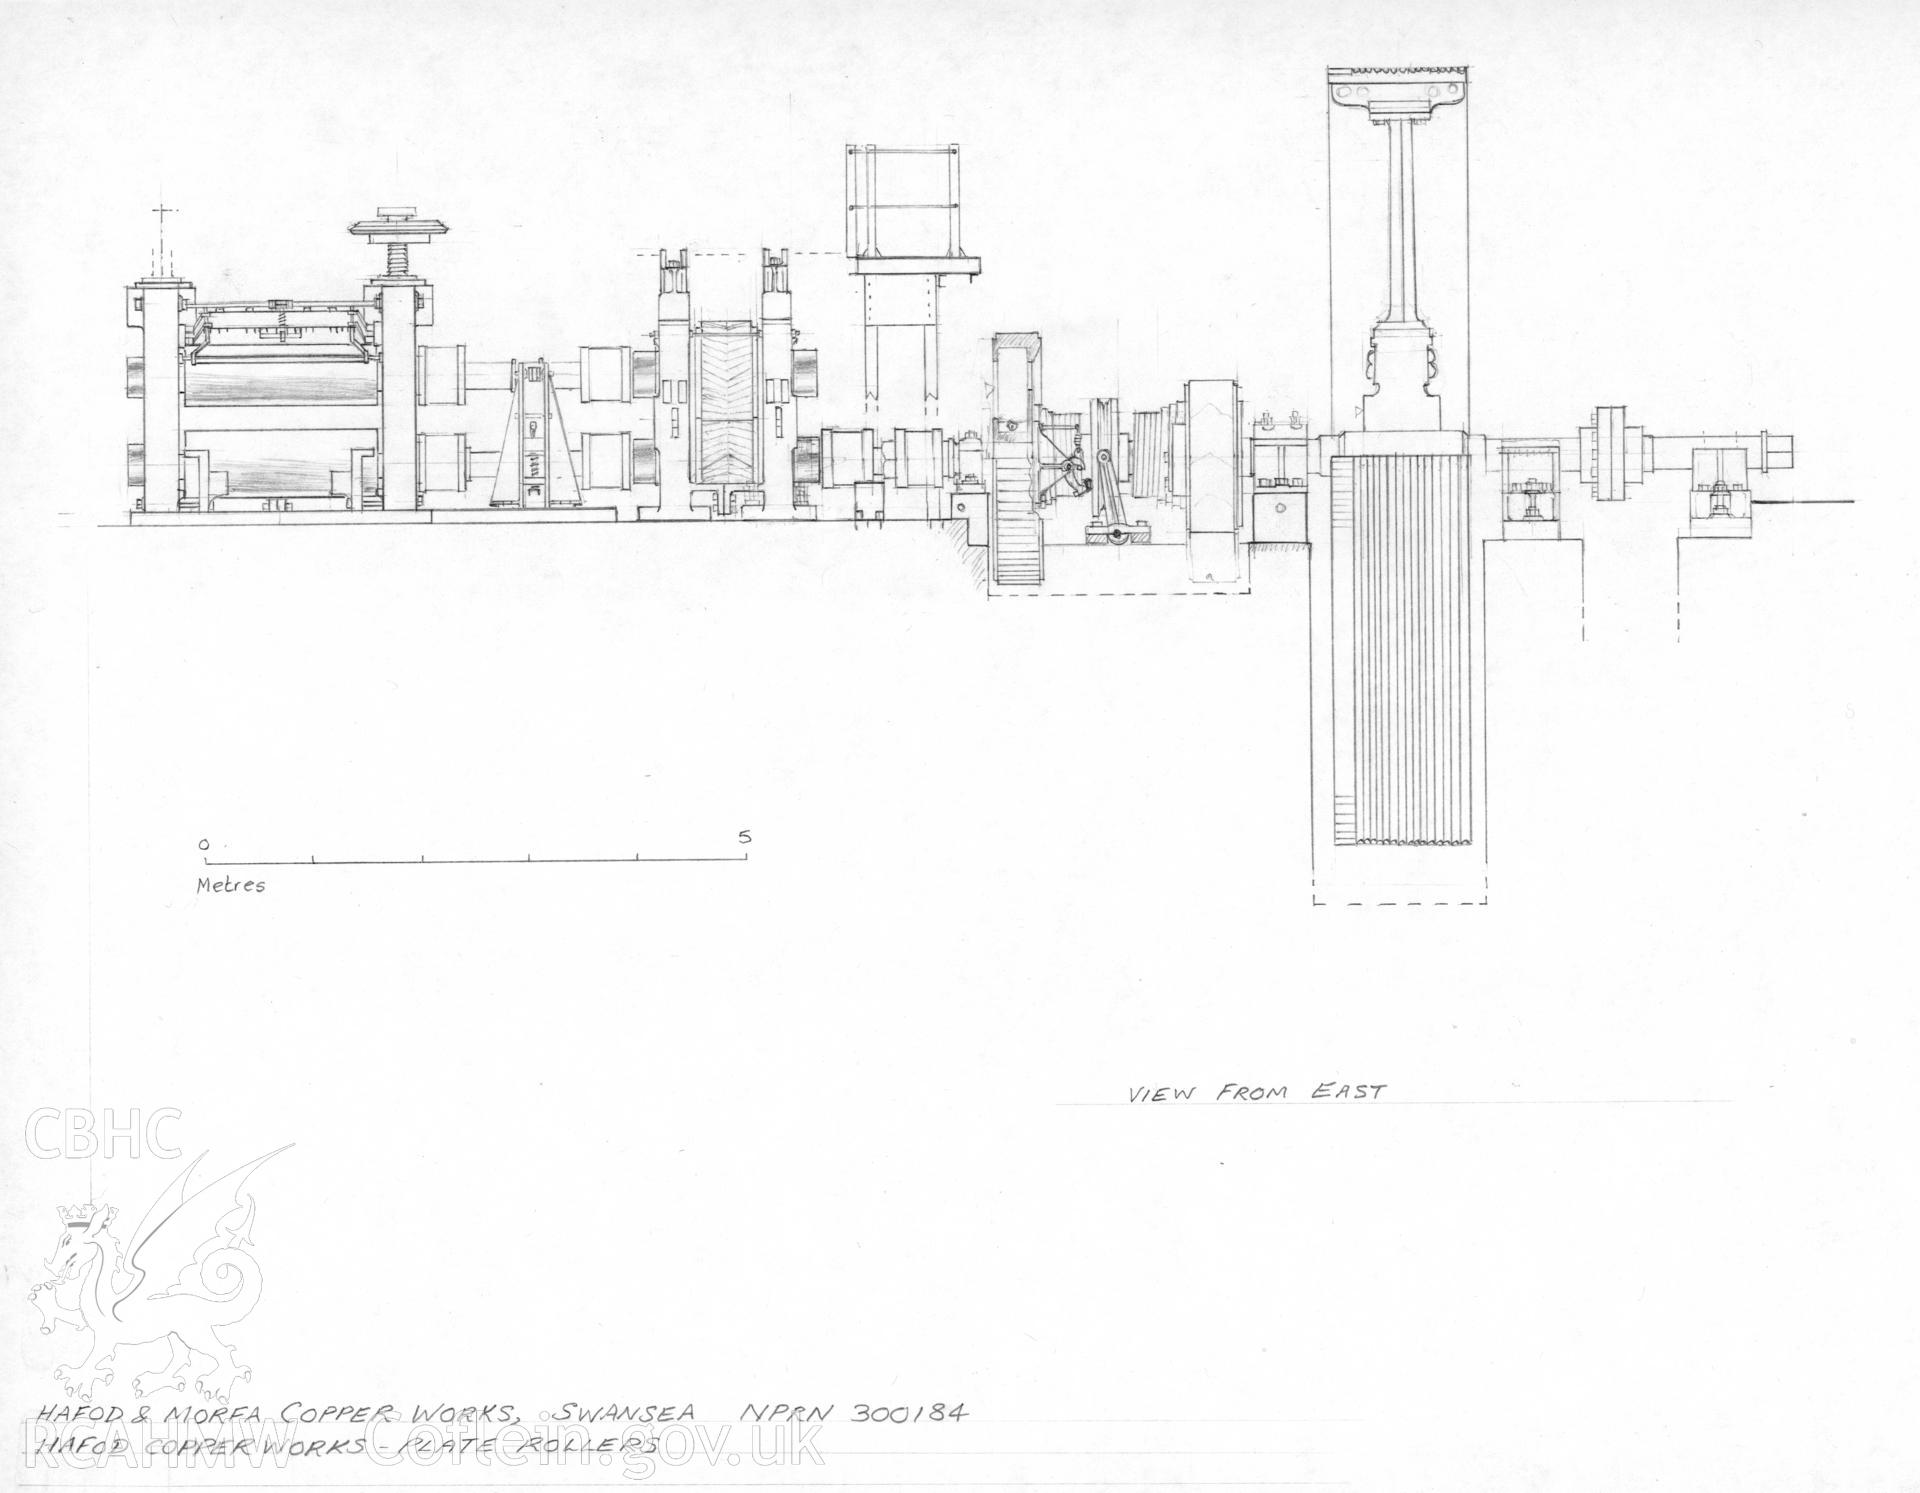 Measured survey comprising elevation view of plate rollers at Hafod and Morfa Copperworks, drawn by Geoff Ward, April 2000.